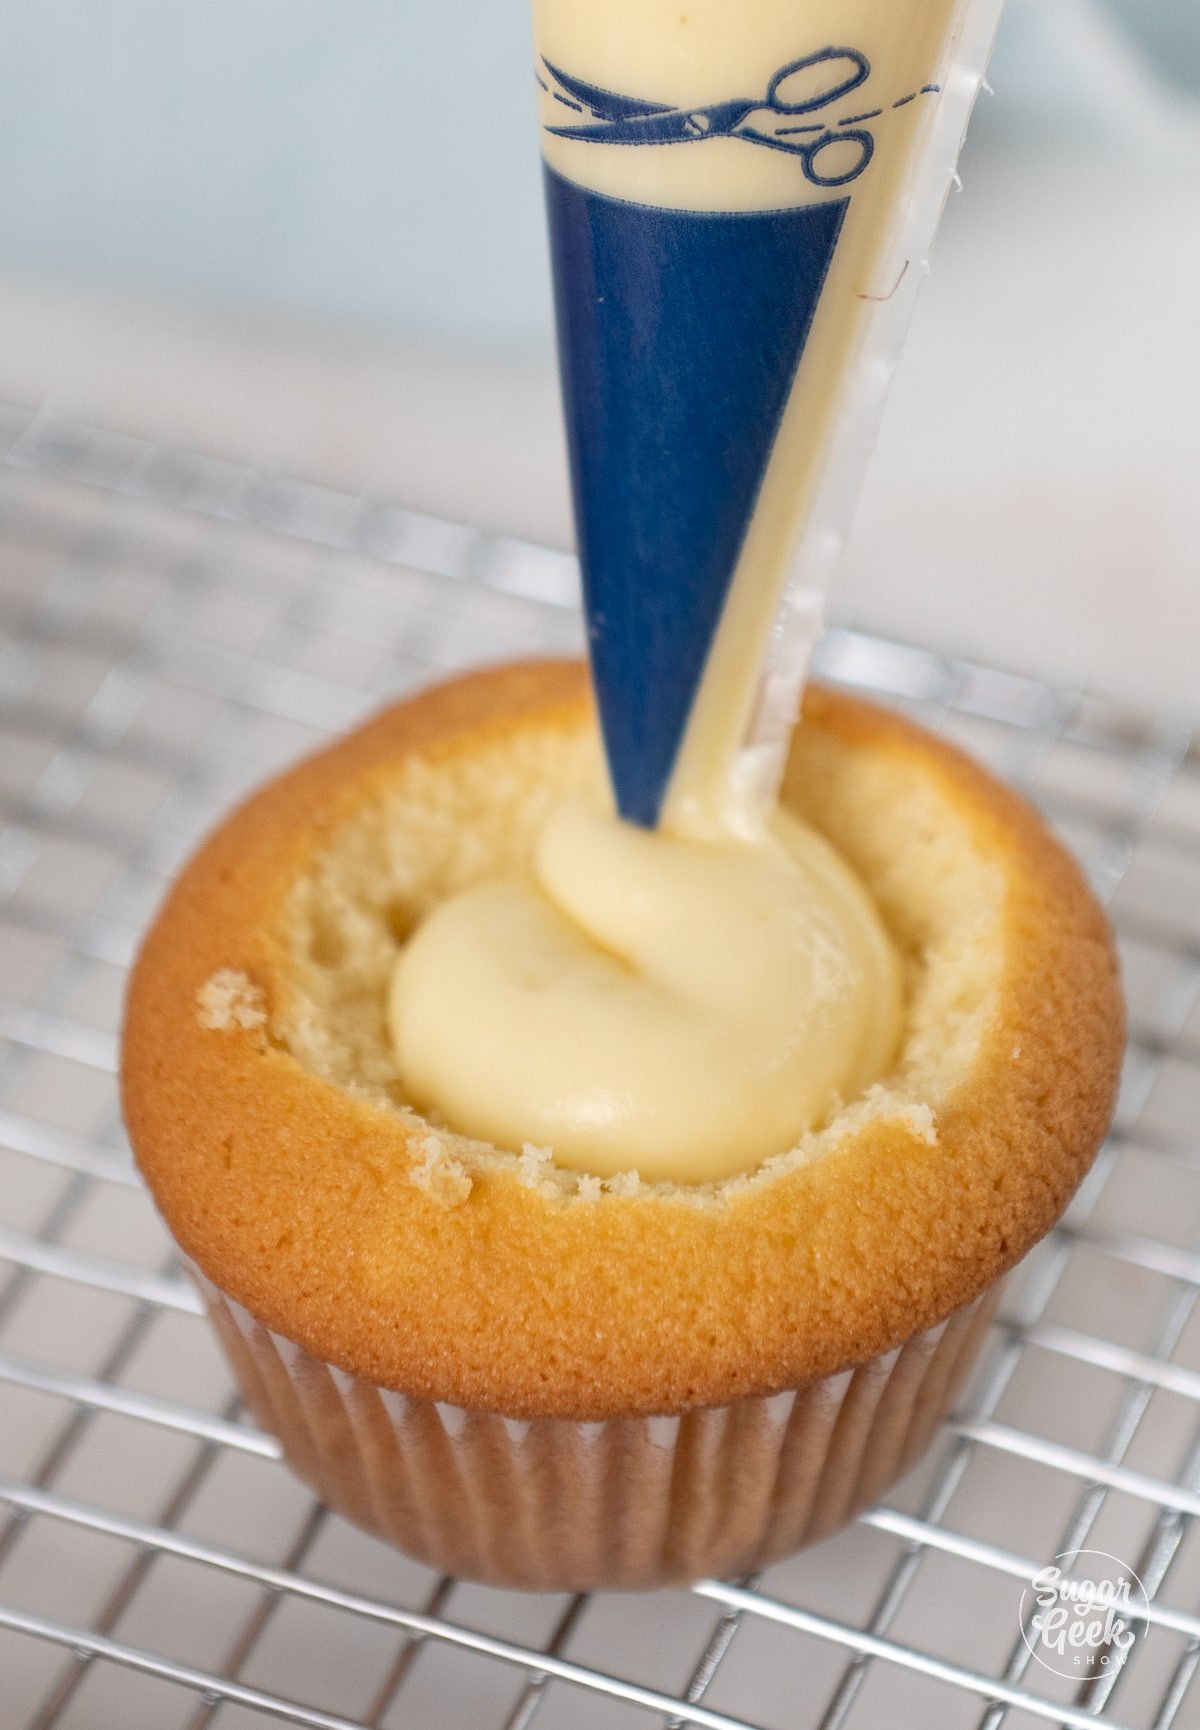 piping filling into center of a yellow cupcake.